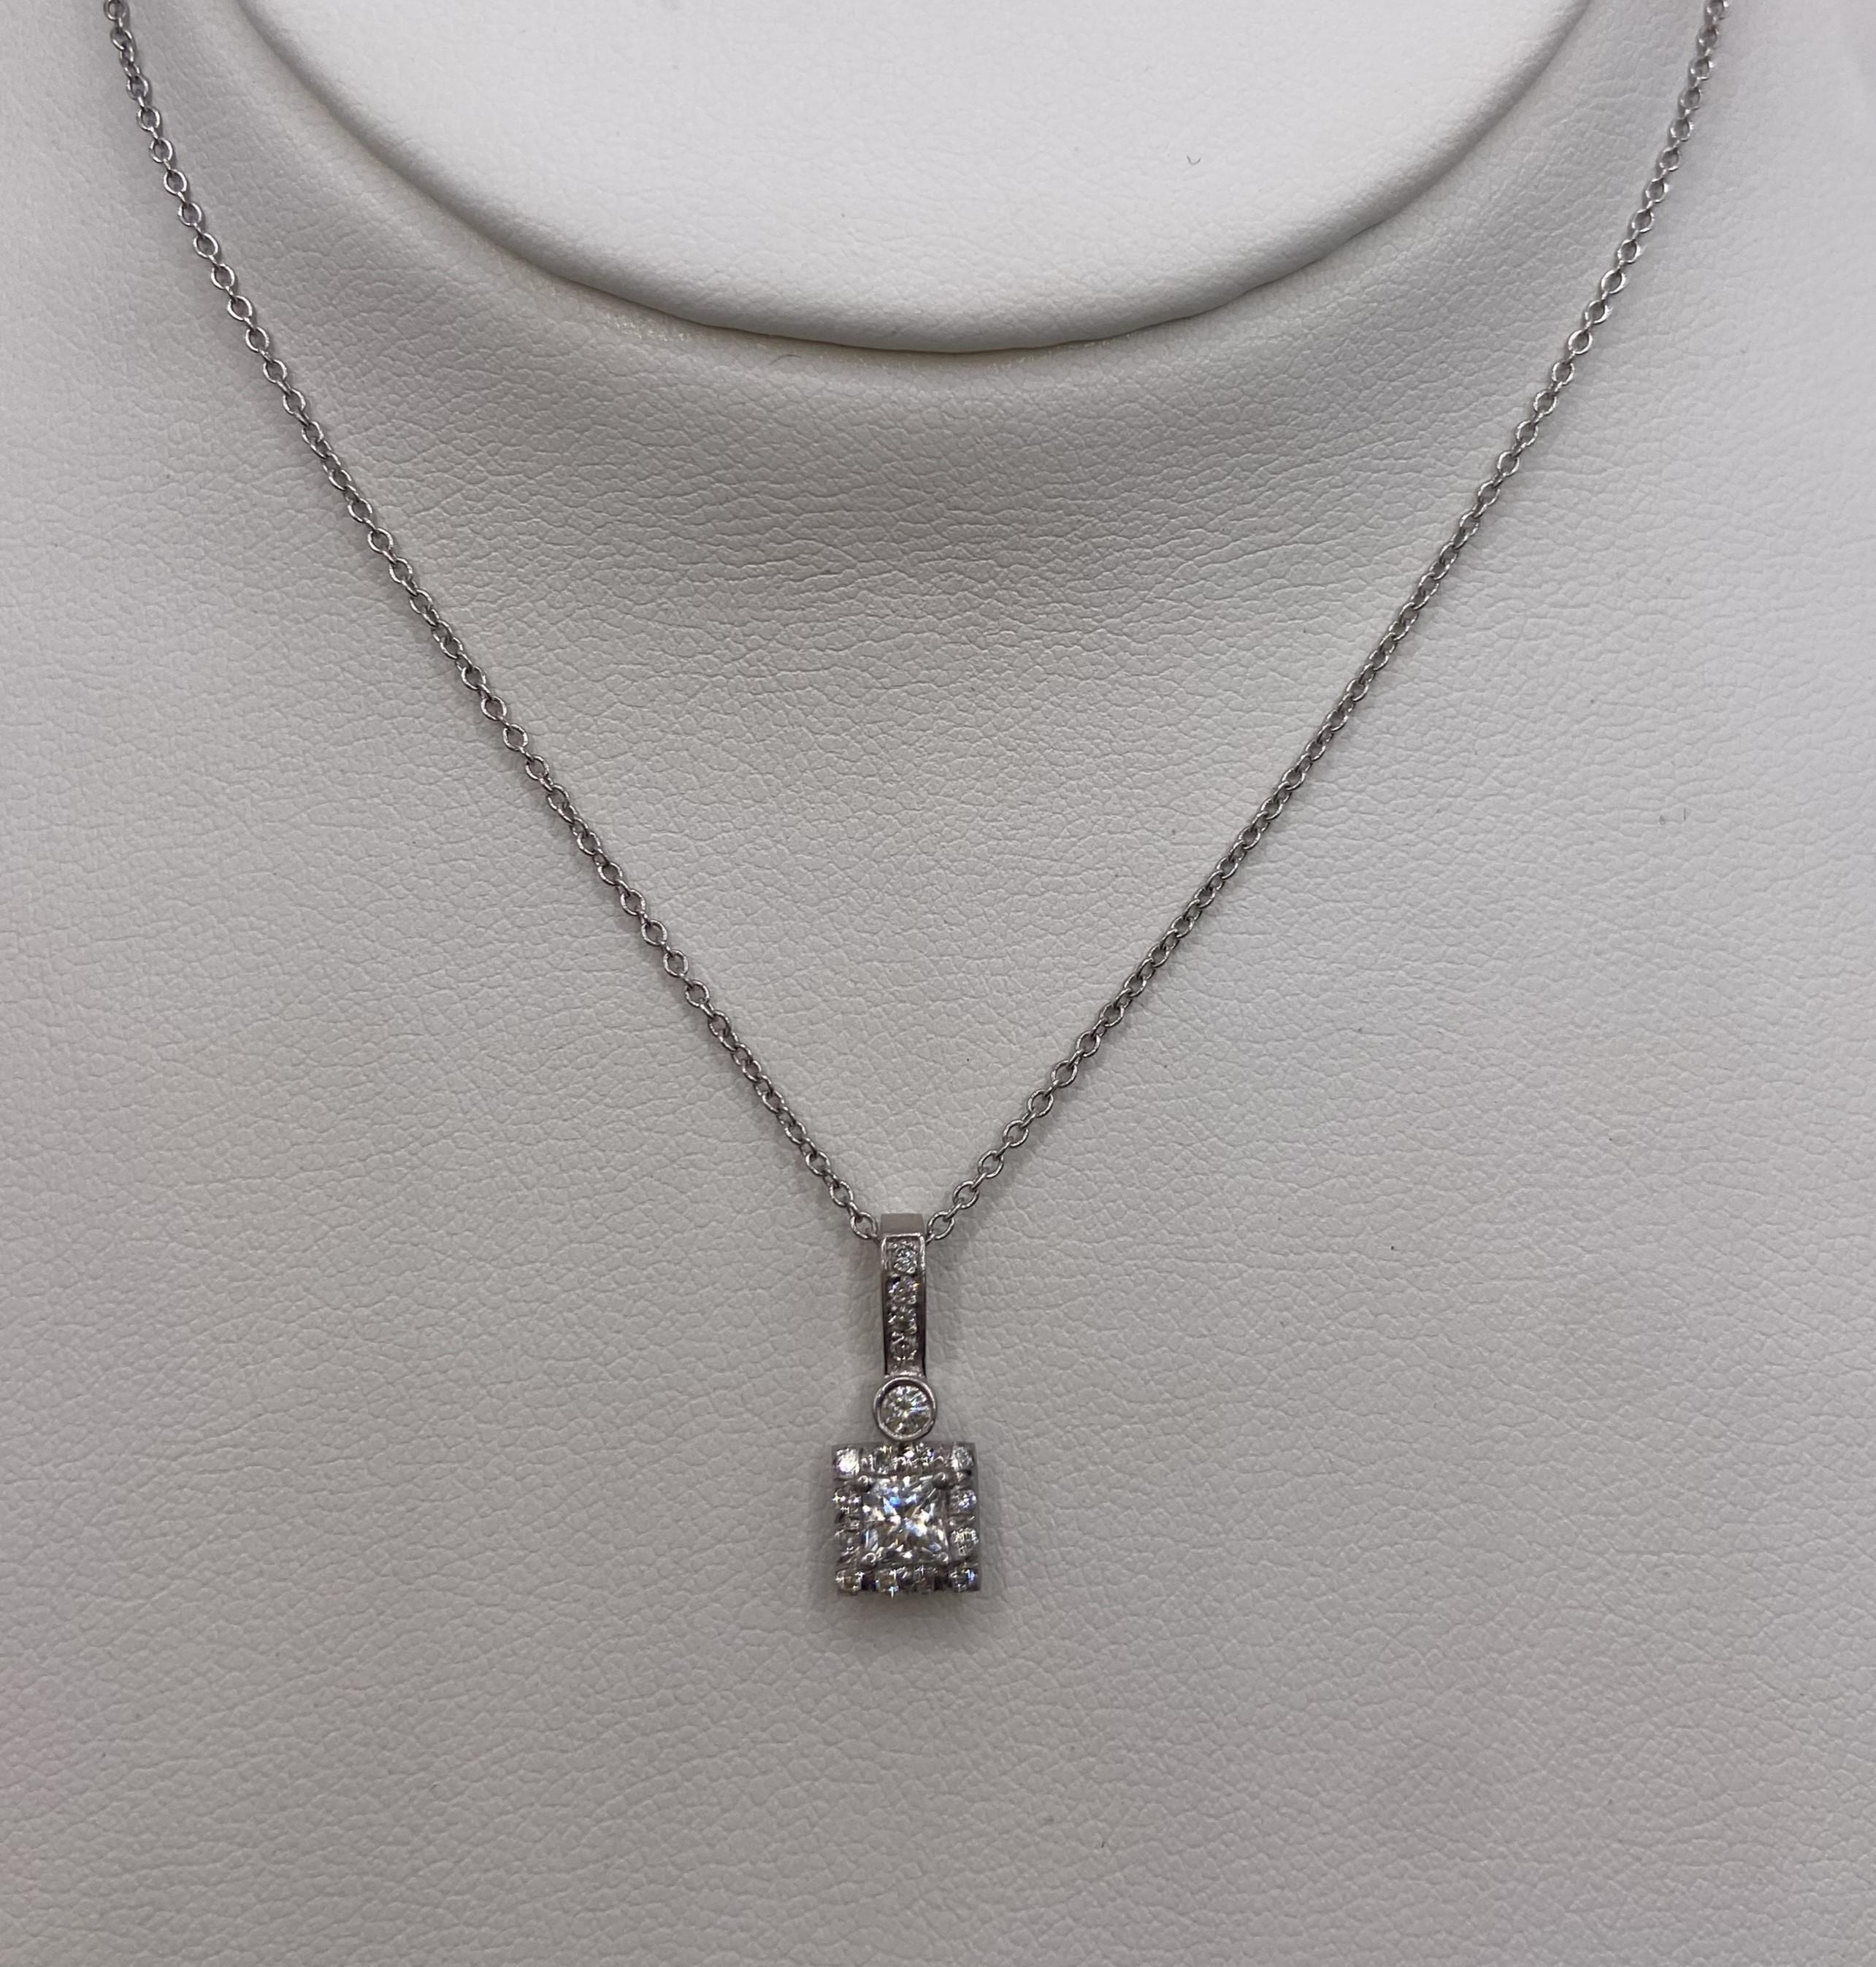 Metal: 18KT White Gold
Designer: SES Creations
Total Carat Weight: 0.41ctw
Chain Length: 16